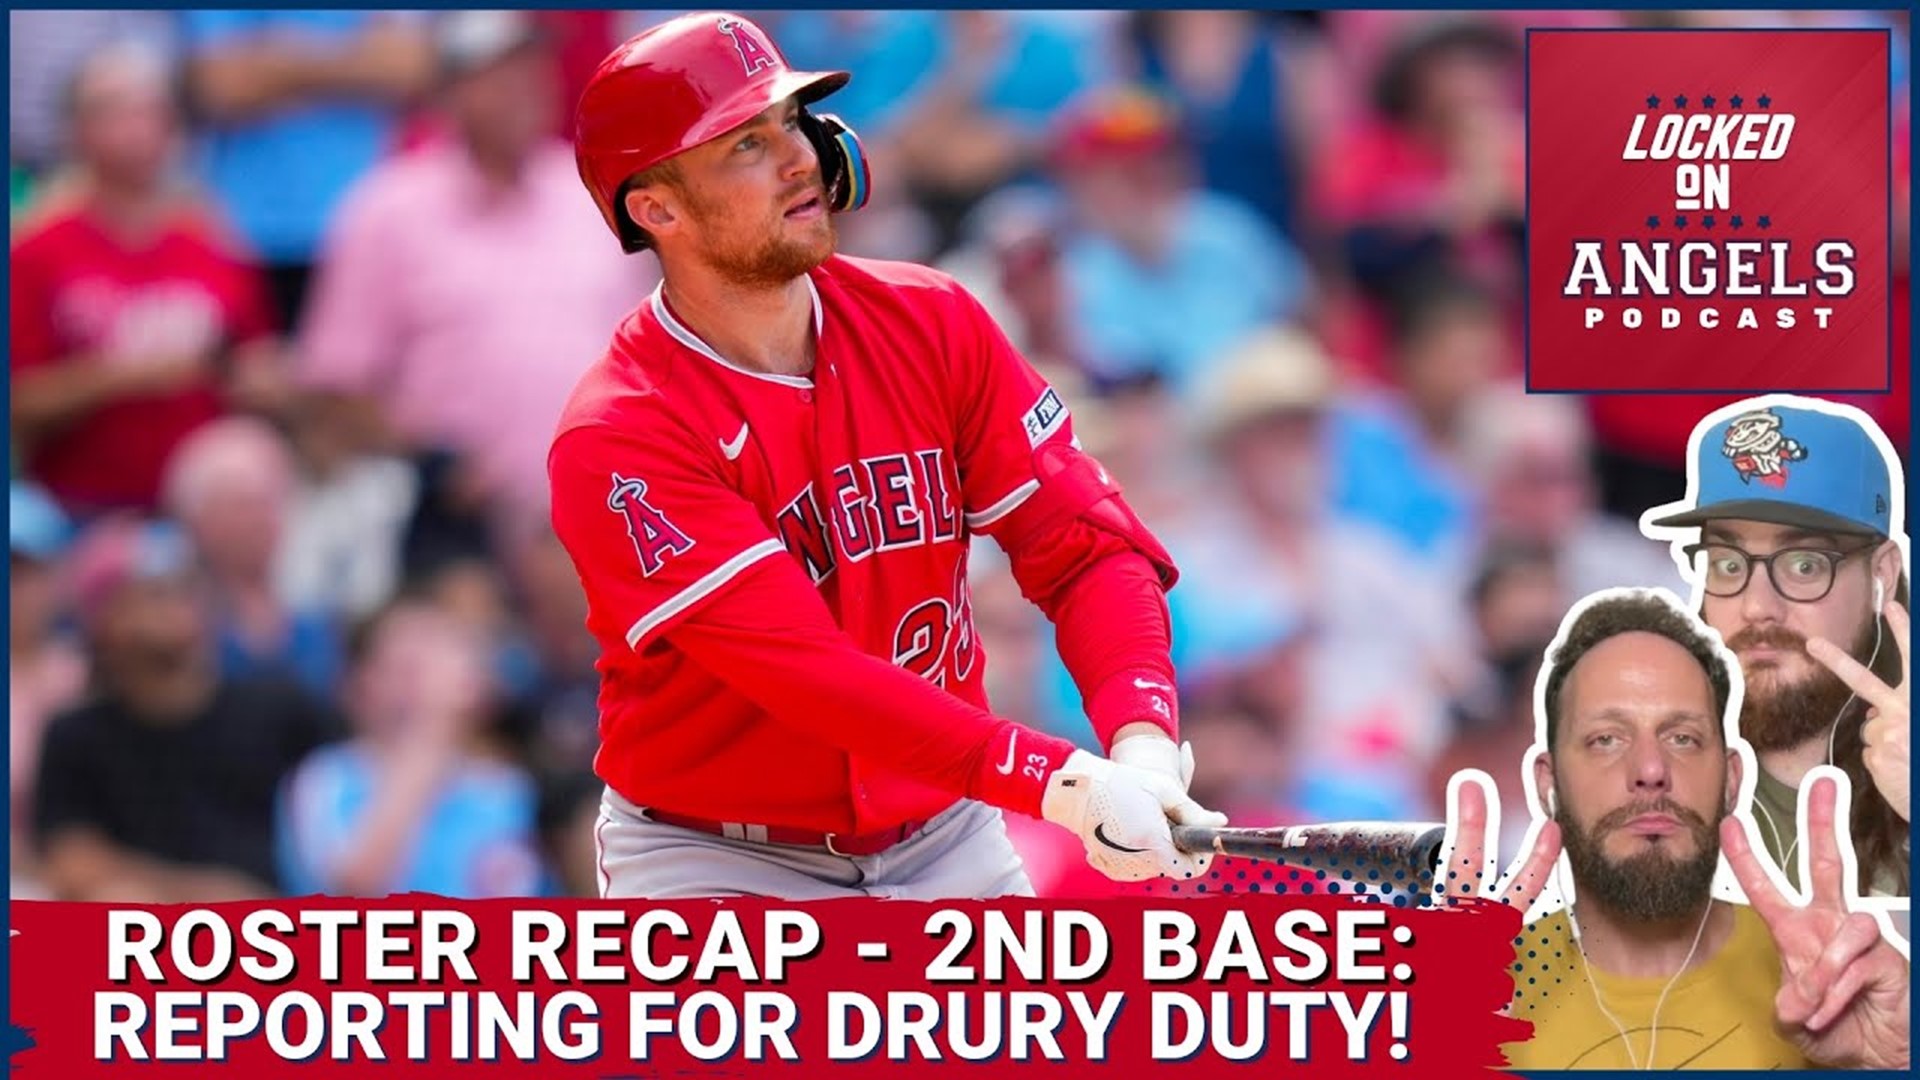 The Los Angeles Angels will see Brandon Drury manage 2nd base duties this season, as he's coming off one of the best seasons of his career